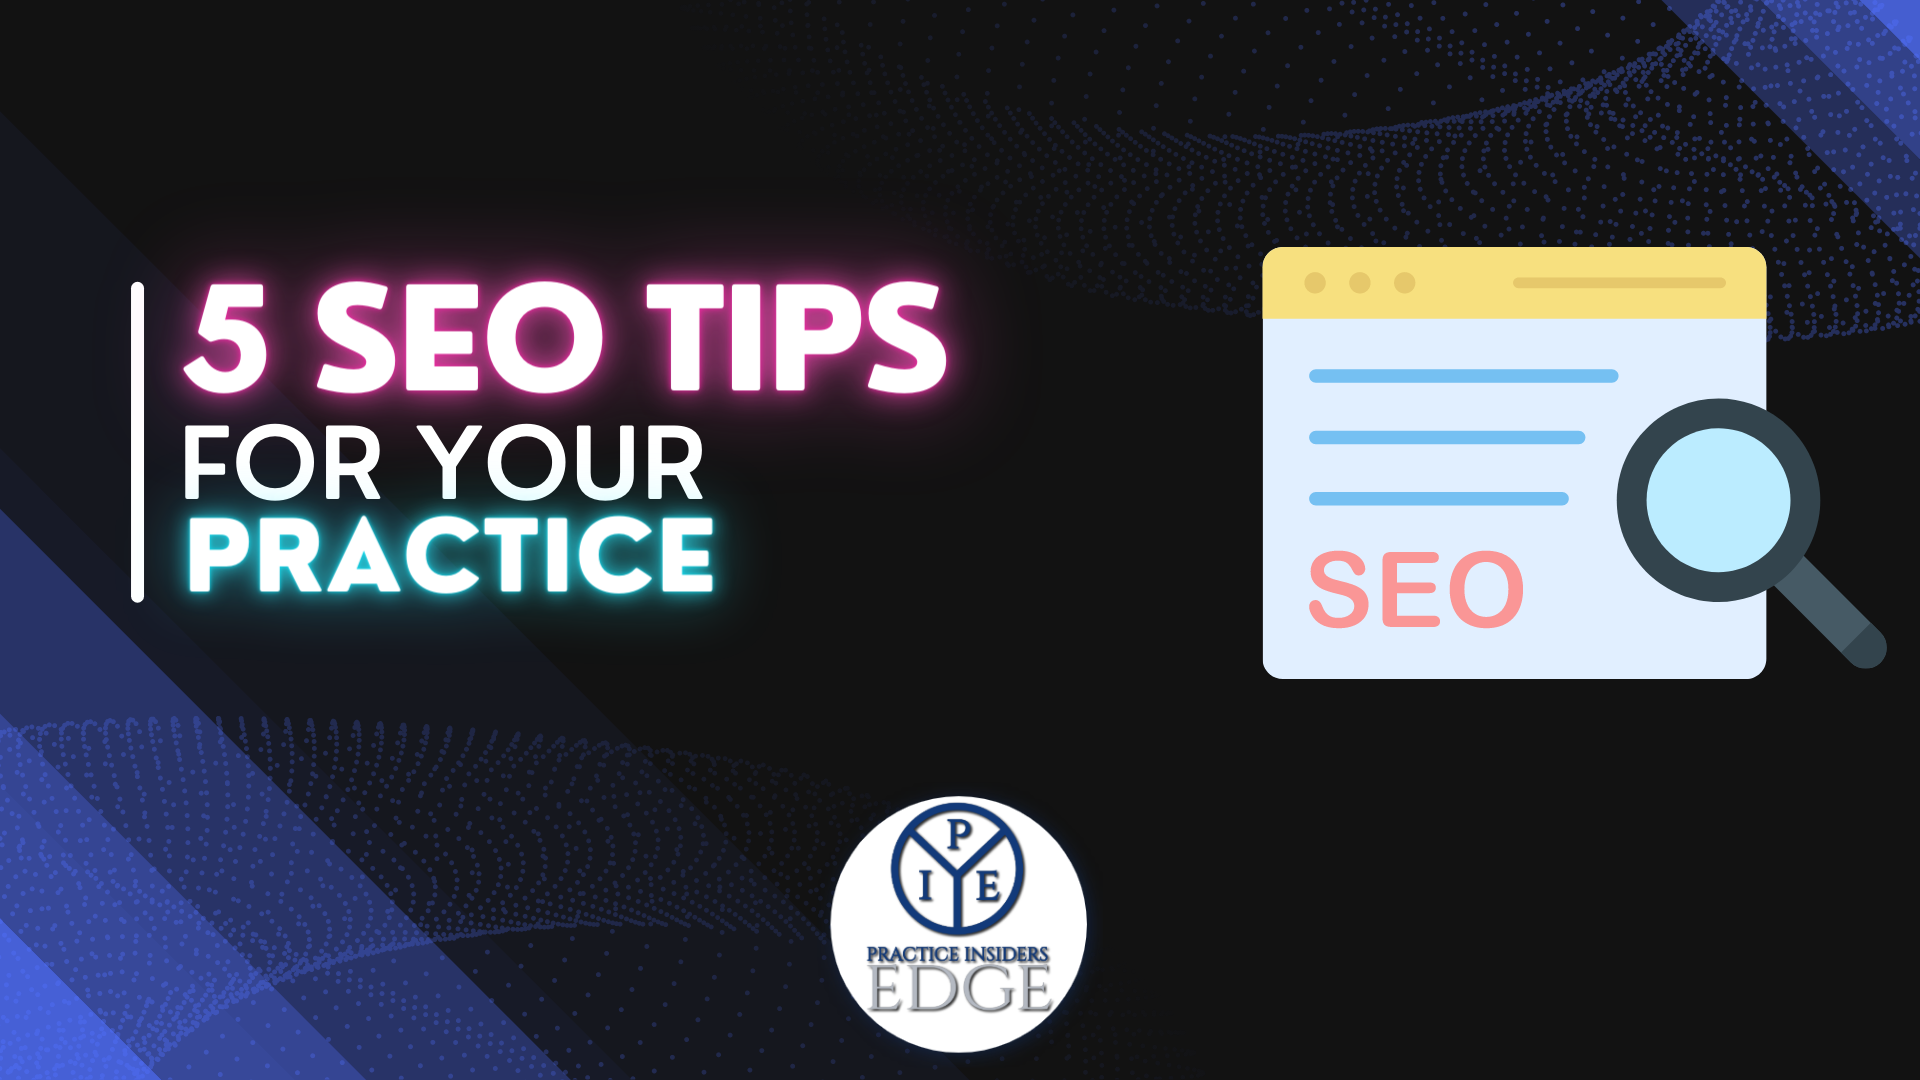 5 SEO Tips For Your Practice